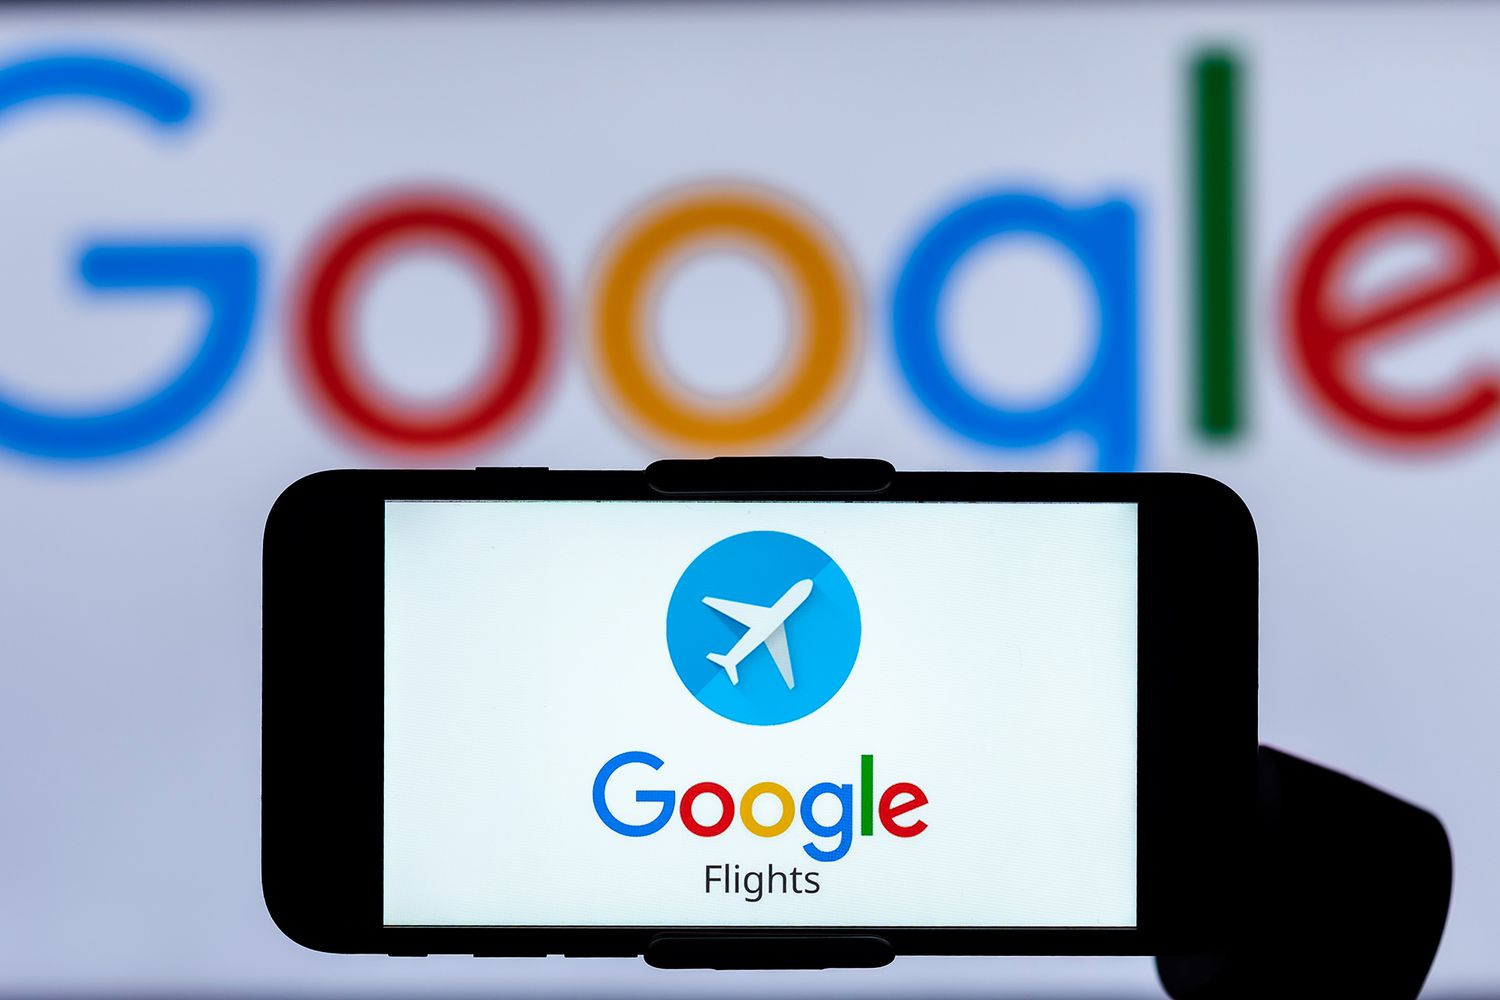 Your Complete Guide to Finding and Booking Flights on Google.com